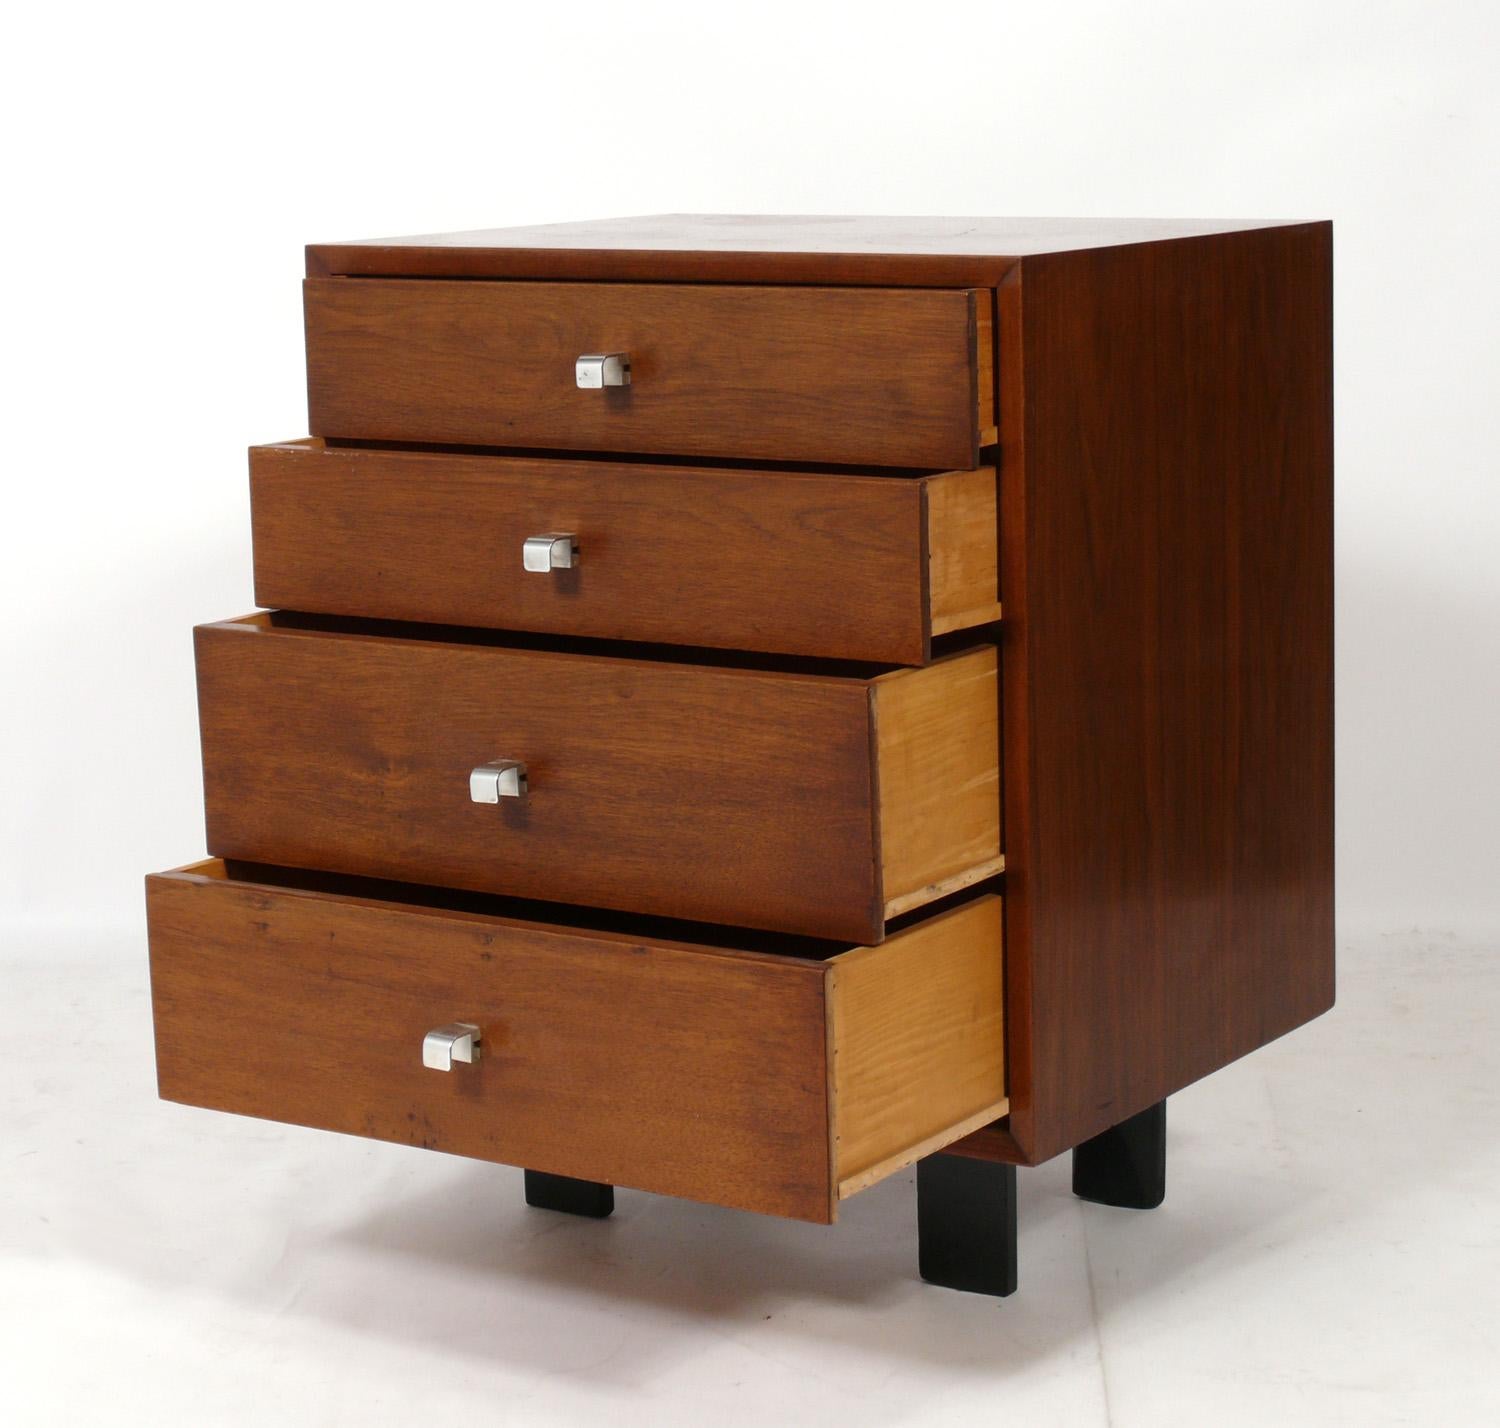 Clean lined mid century modern chest, designed by George Nelson for Herman Miller, American. circa 1950s. This piece is a versatile size and can be used as a small chest, end table, or nightstand. Features four deep drawers in a combed oak case with